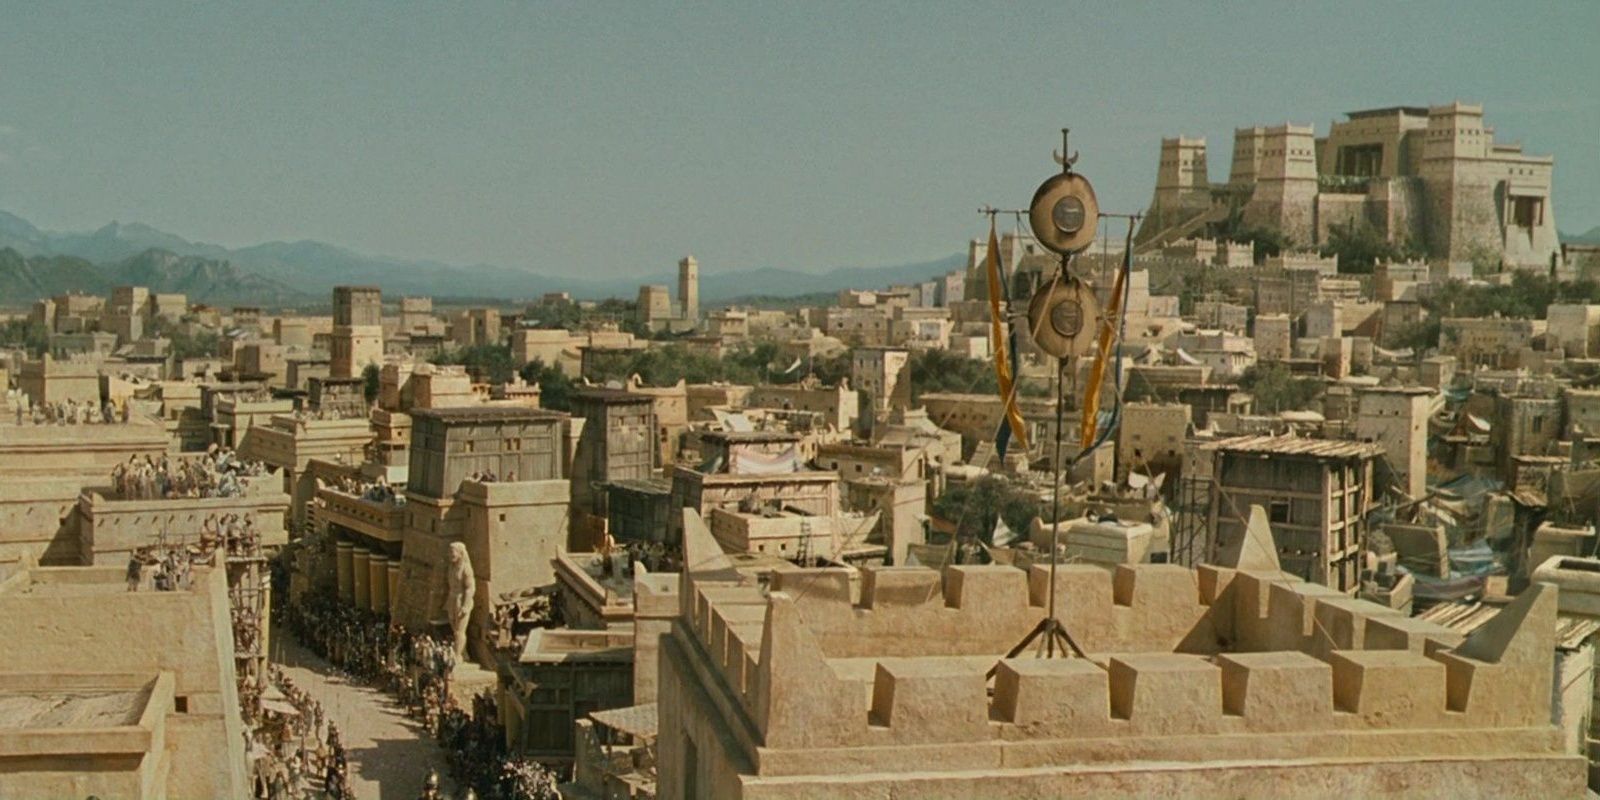 City of Troy from the movie Troy